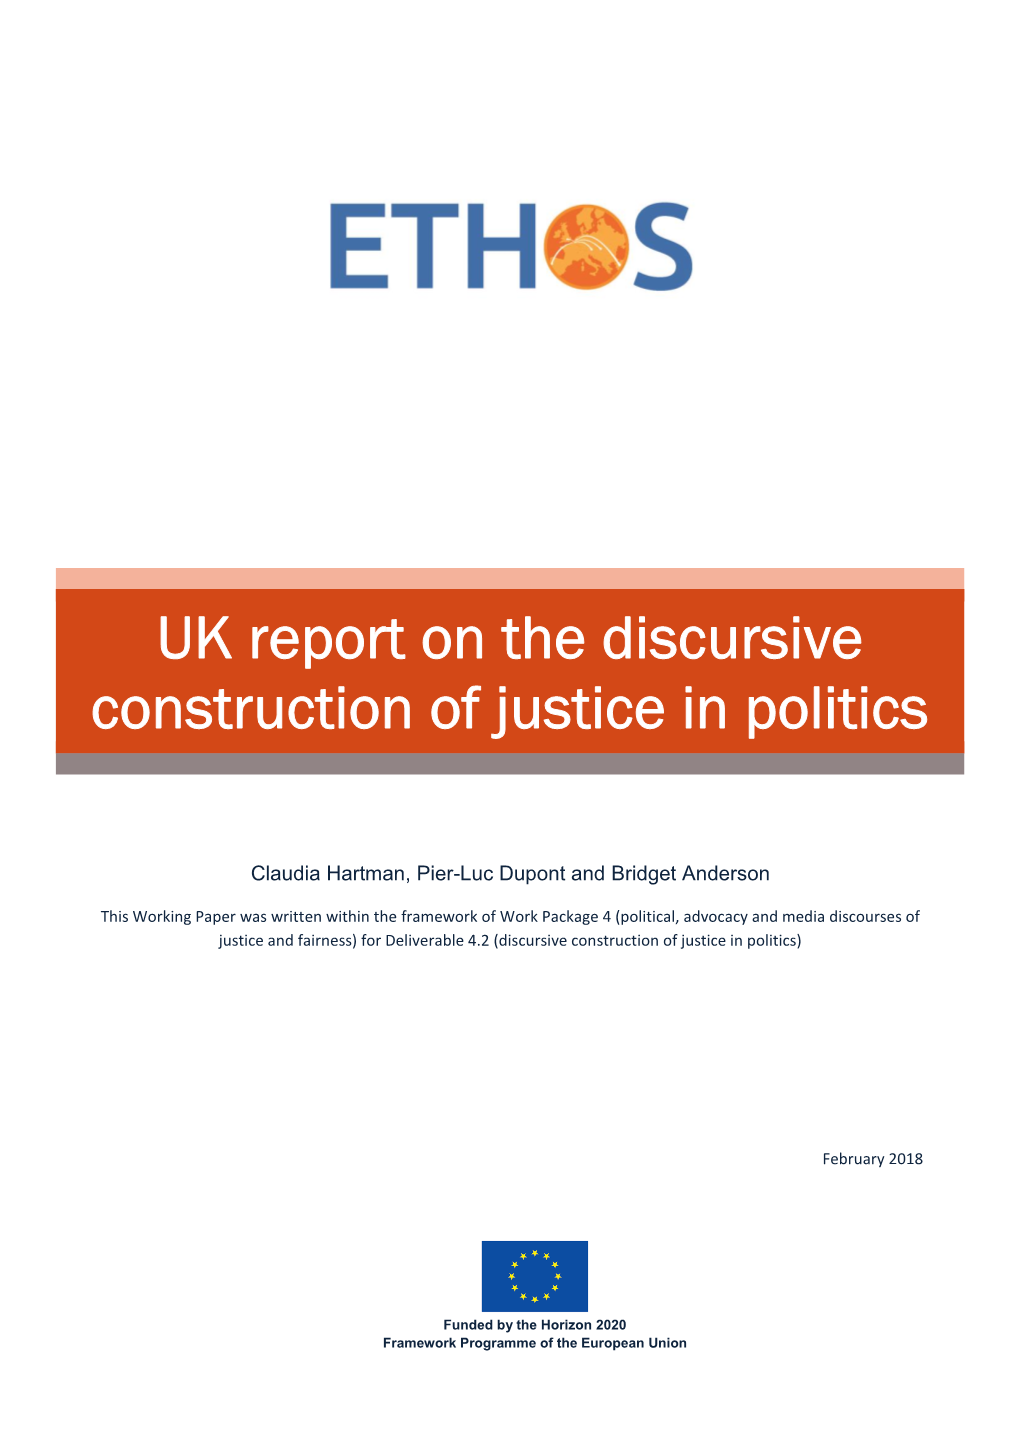 UK Report on the Discursive Construction of Justice in Politics